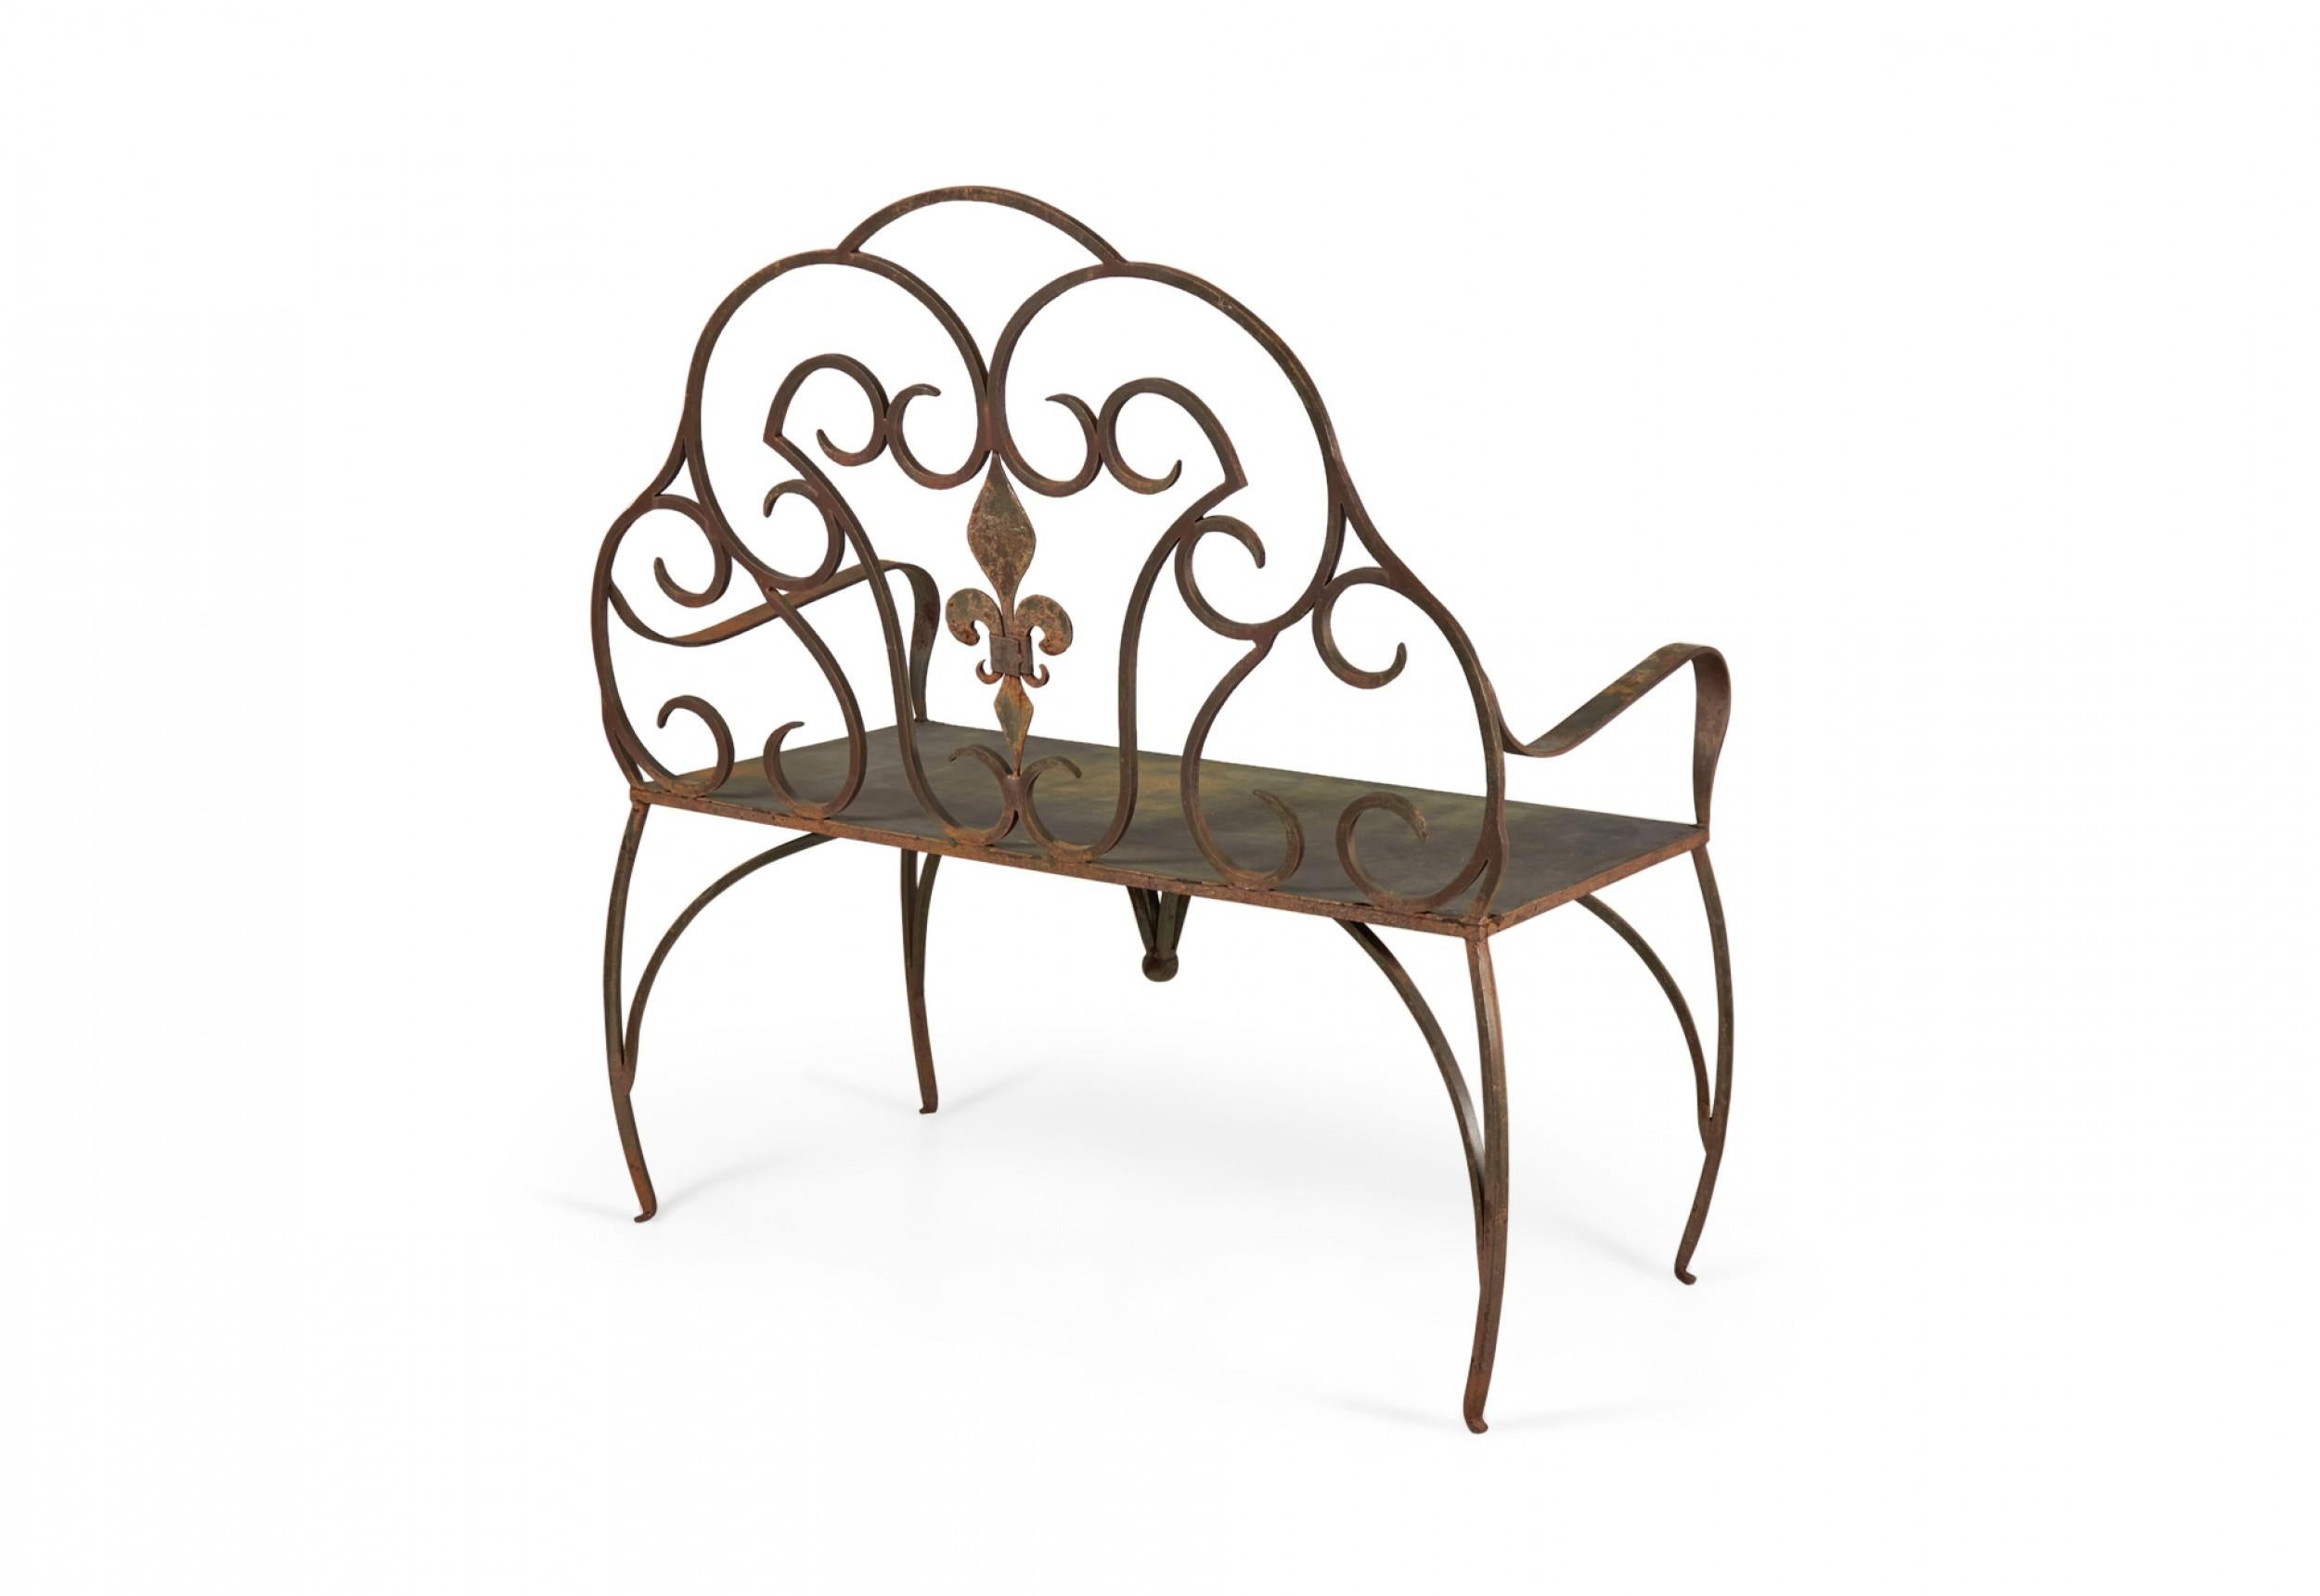 20th Century Jan Barboglio Mexican Modern Style Wrought Iron Outdoor Fleur de Lis Crest Bench For Sale